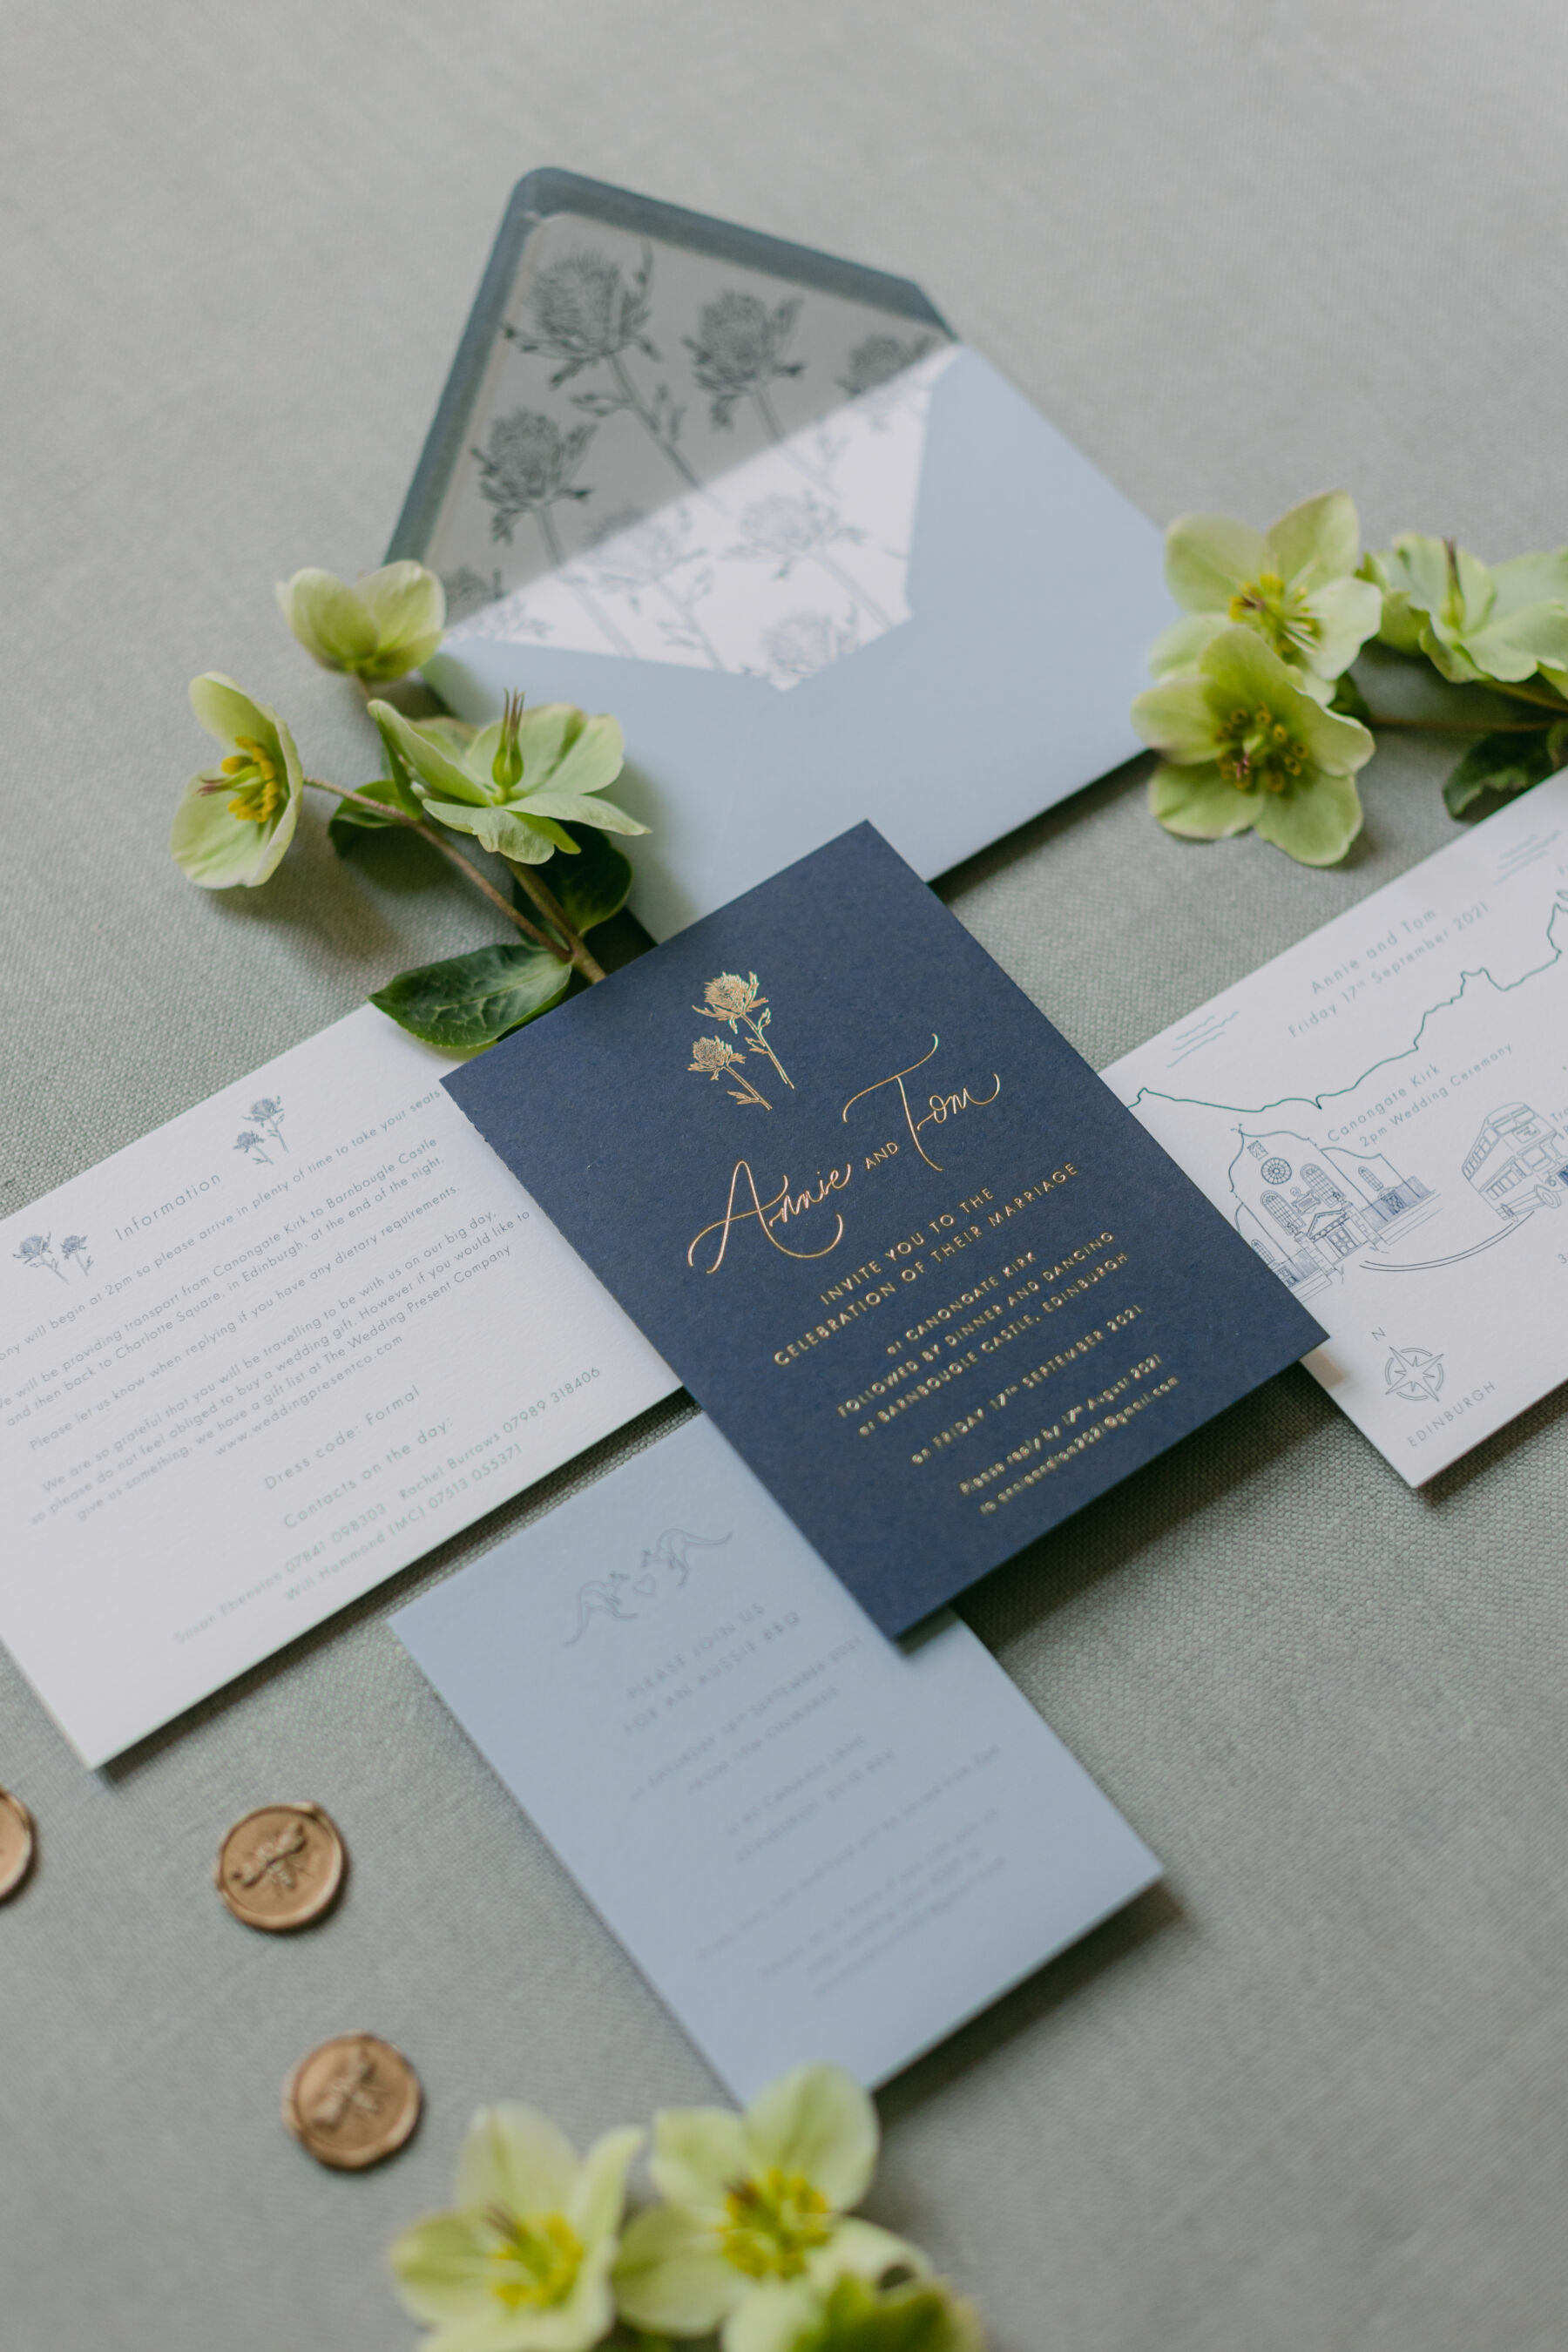 Bespoke wedding invitation suite with map and additional insert cards.